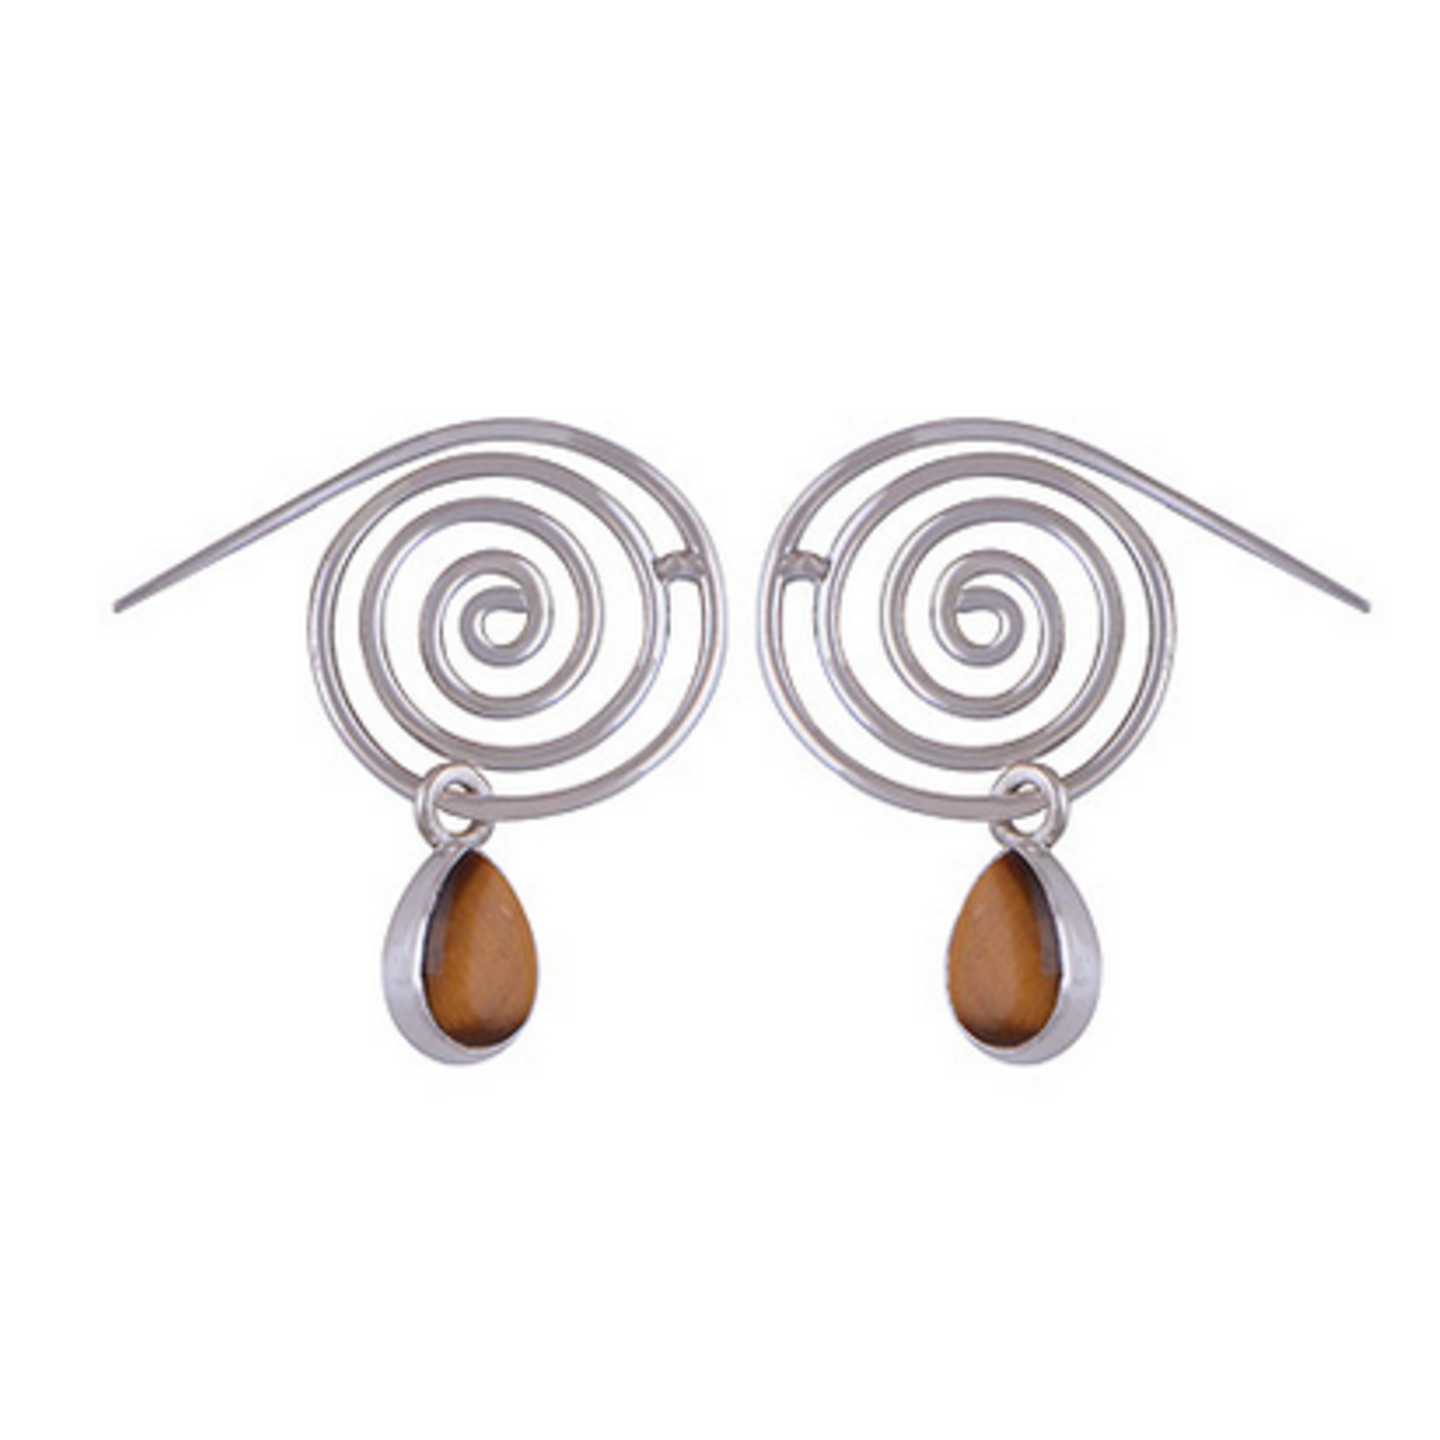 The Spiral Silver Earring